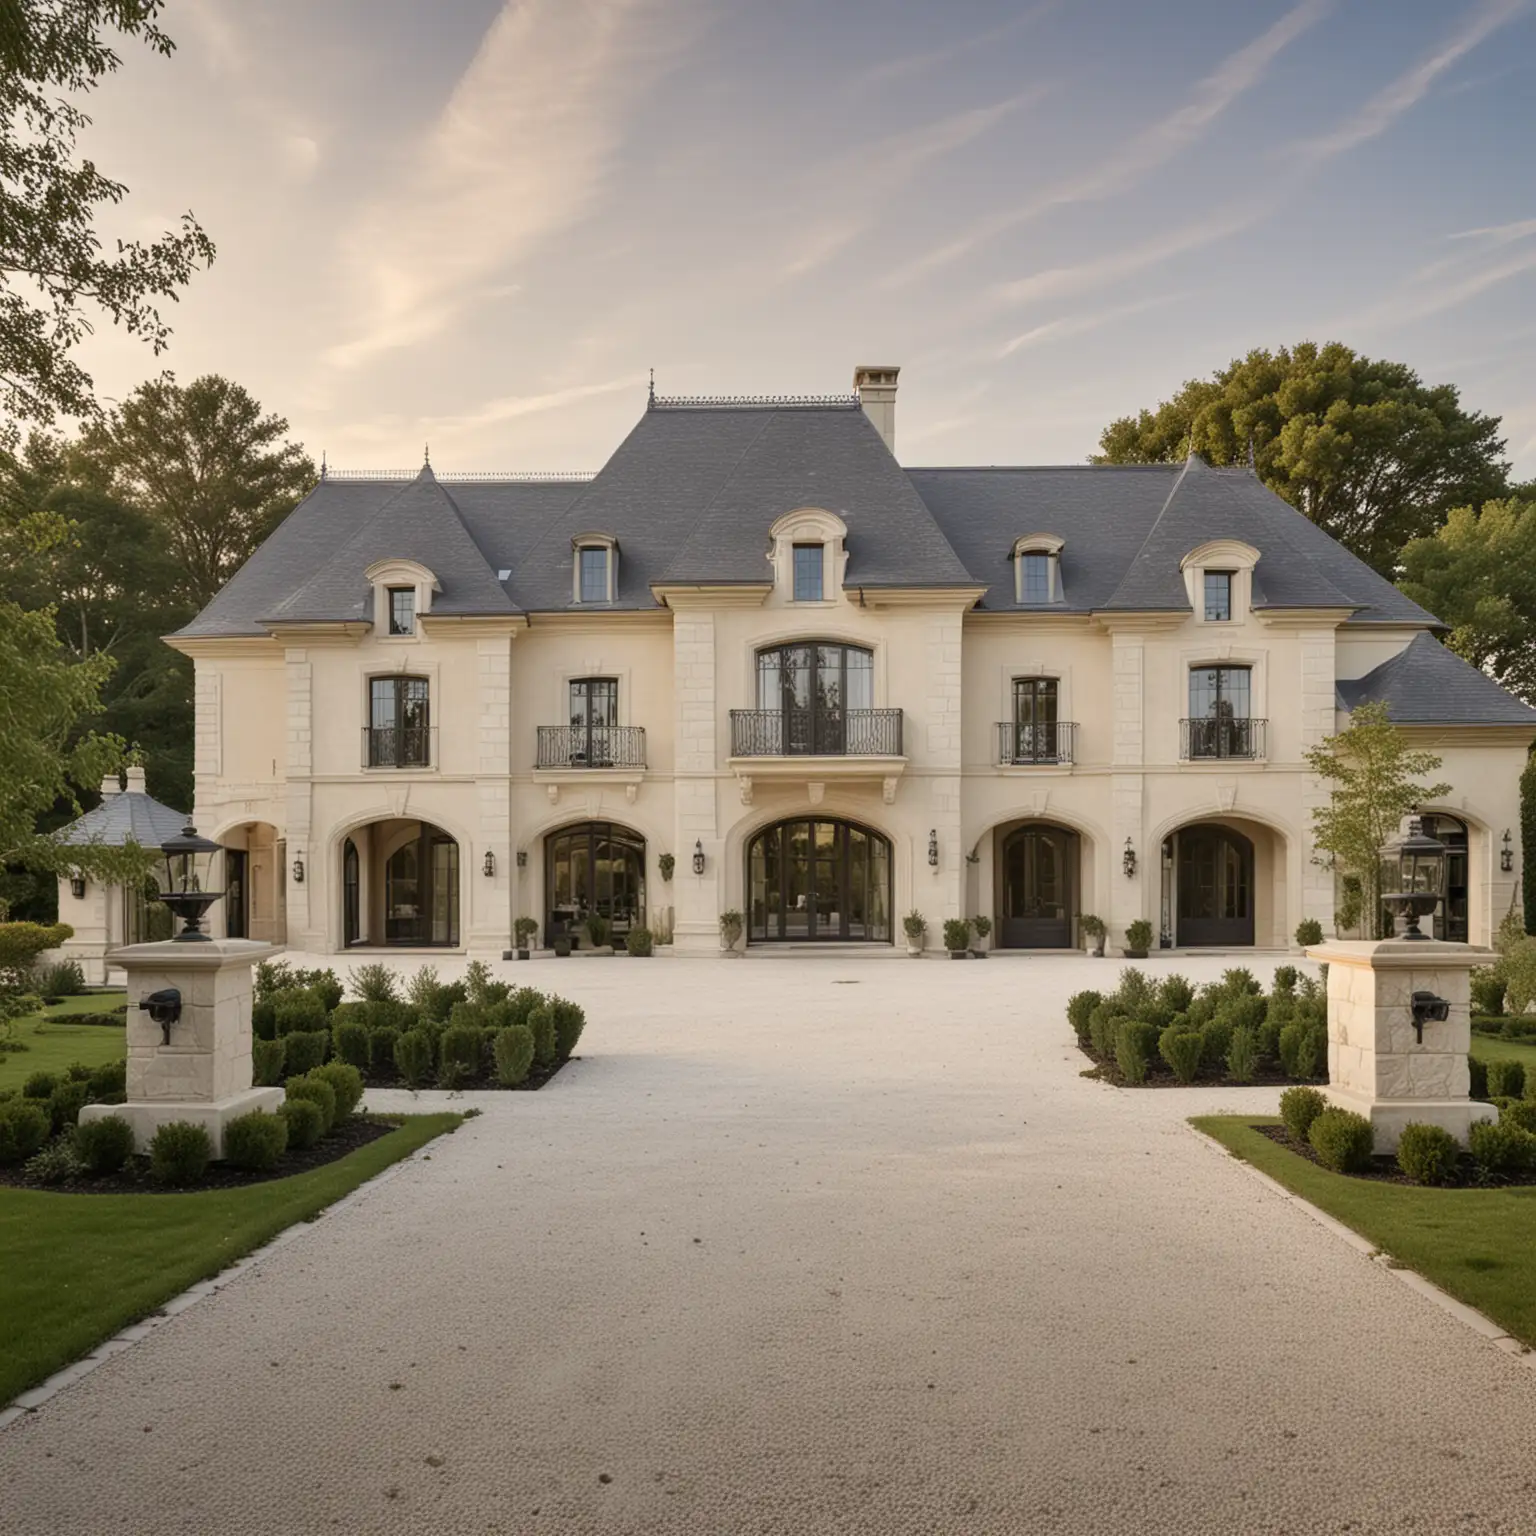 Modern French Chateau Estate Home with 4Car Garage and Porte Cochere Surrounded by Gardens